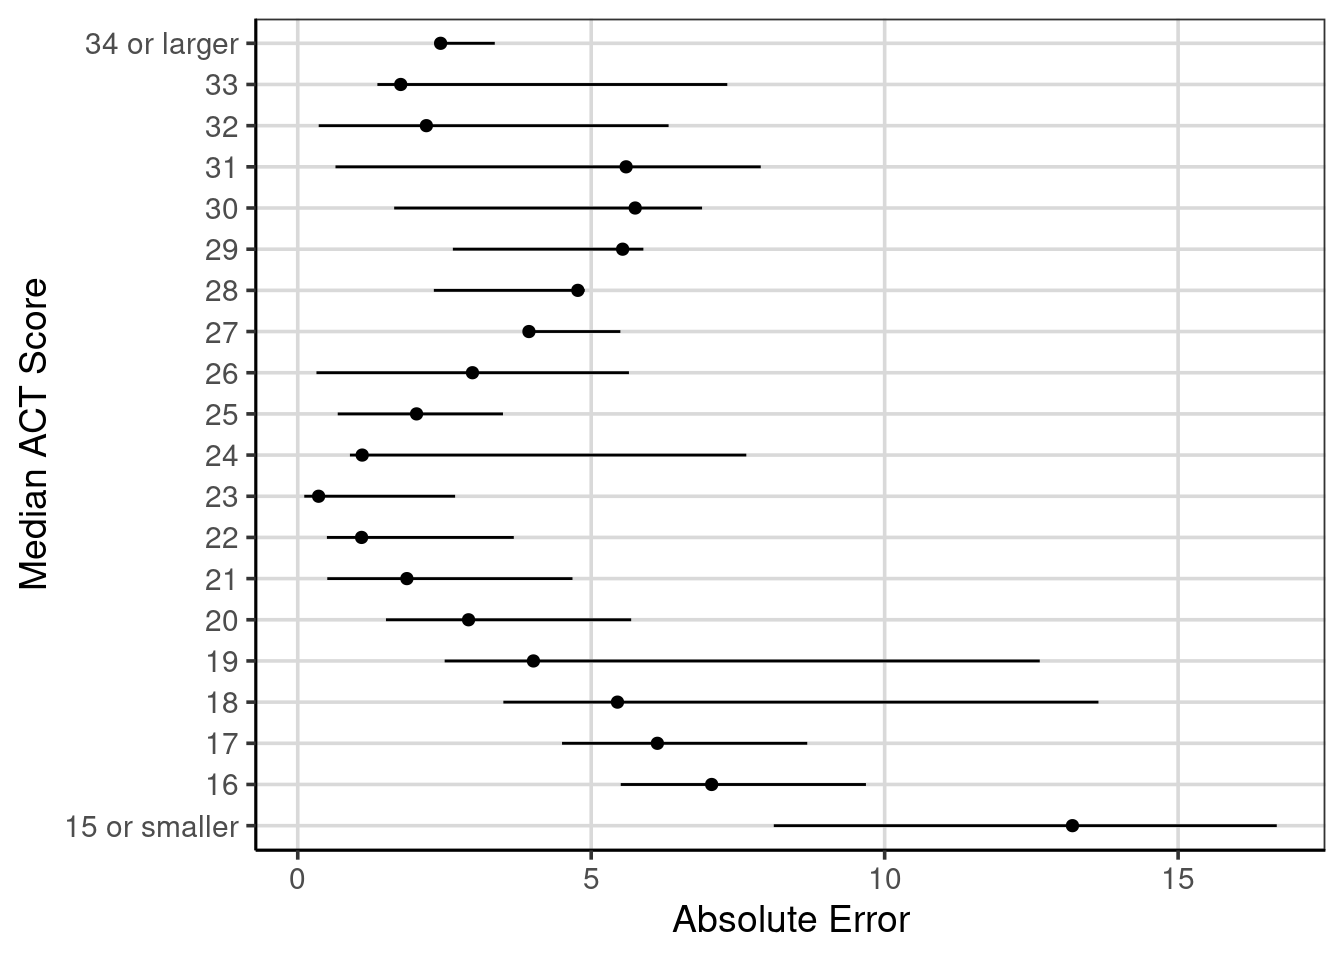 Ranges of absolute errors across different median ACT scores with mean absolute error.